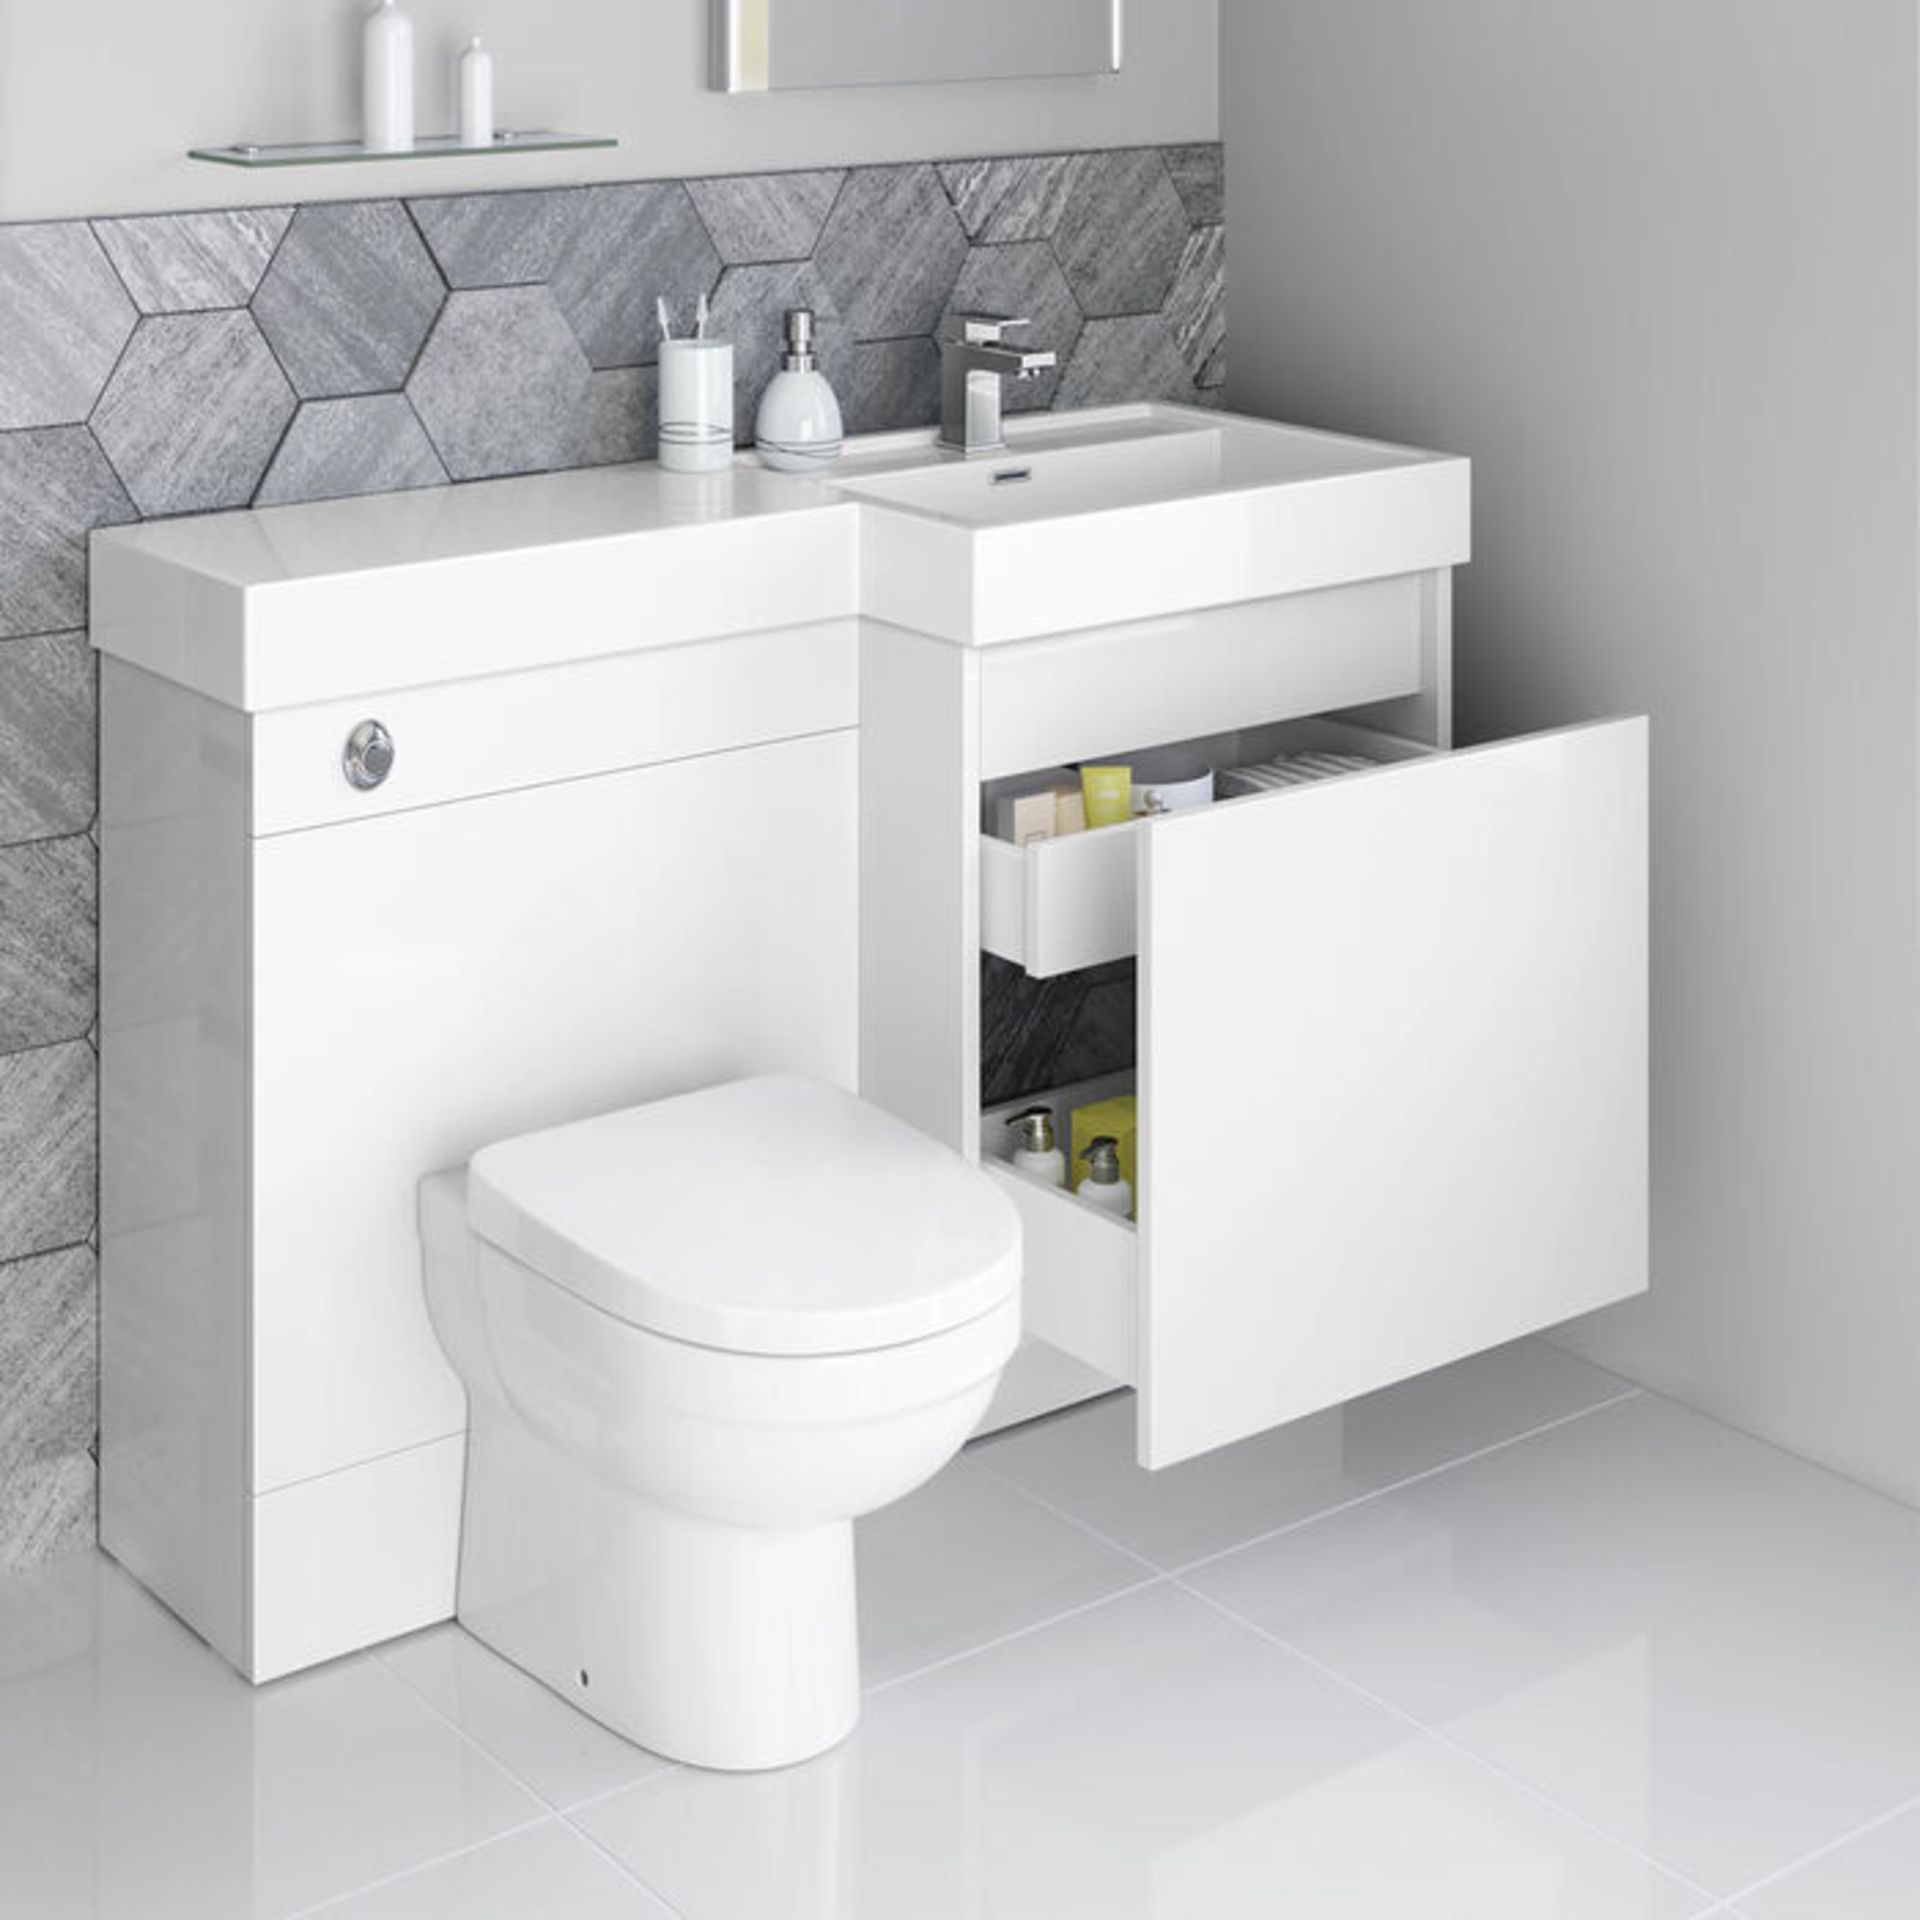 (CP3) 1206mm Olympia Gloss White Drawer Vanity Unit - FULL SET. L-Shaped combined vanity unit p... - Image 2 of 4